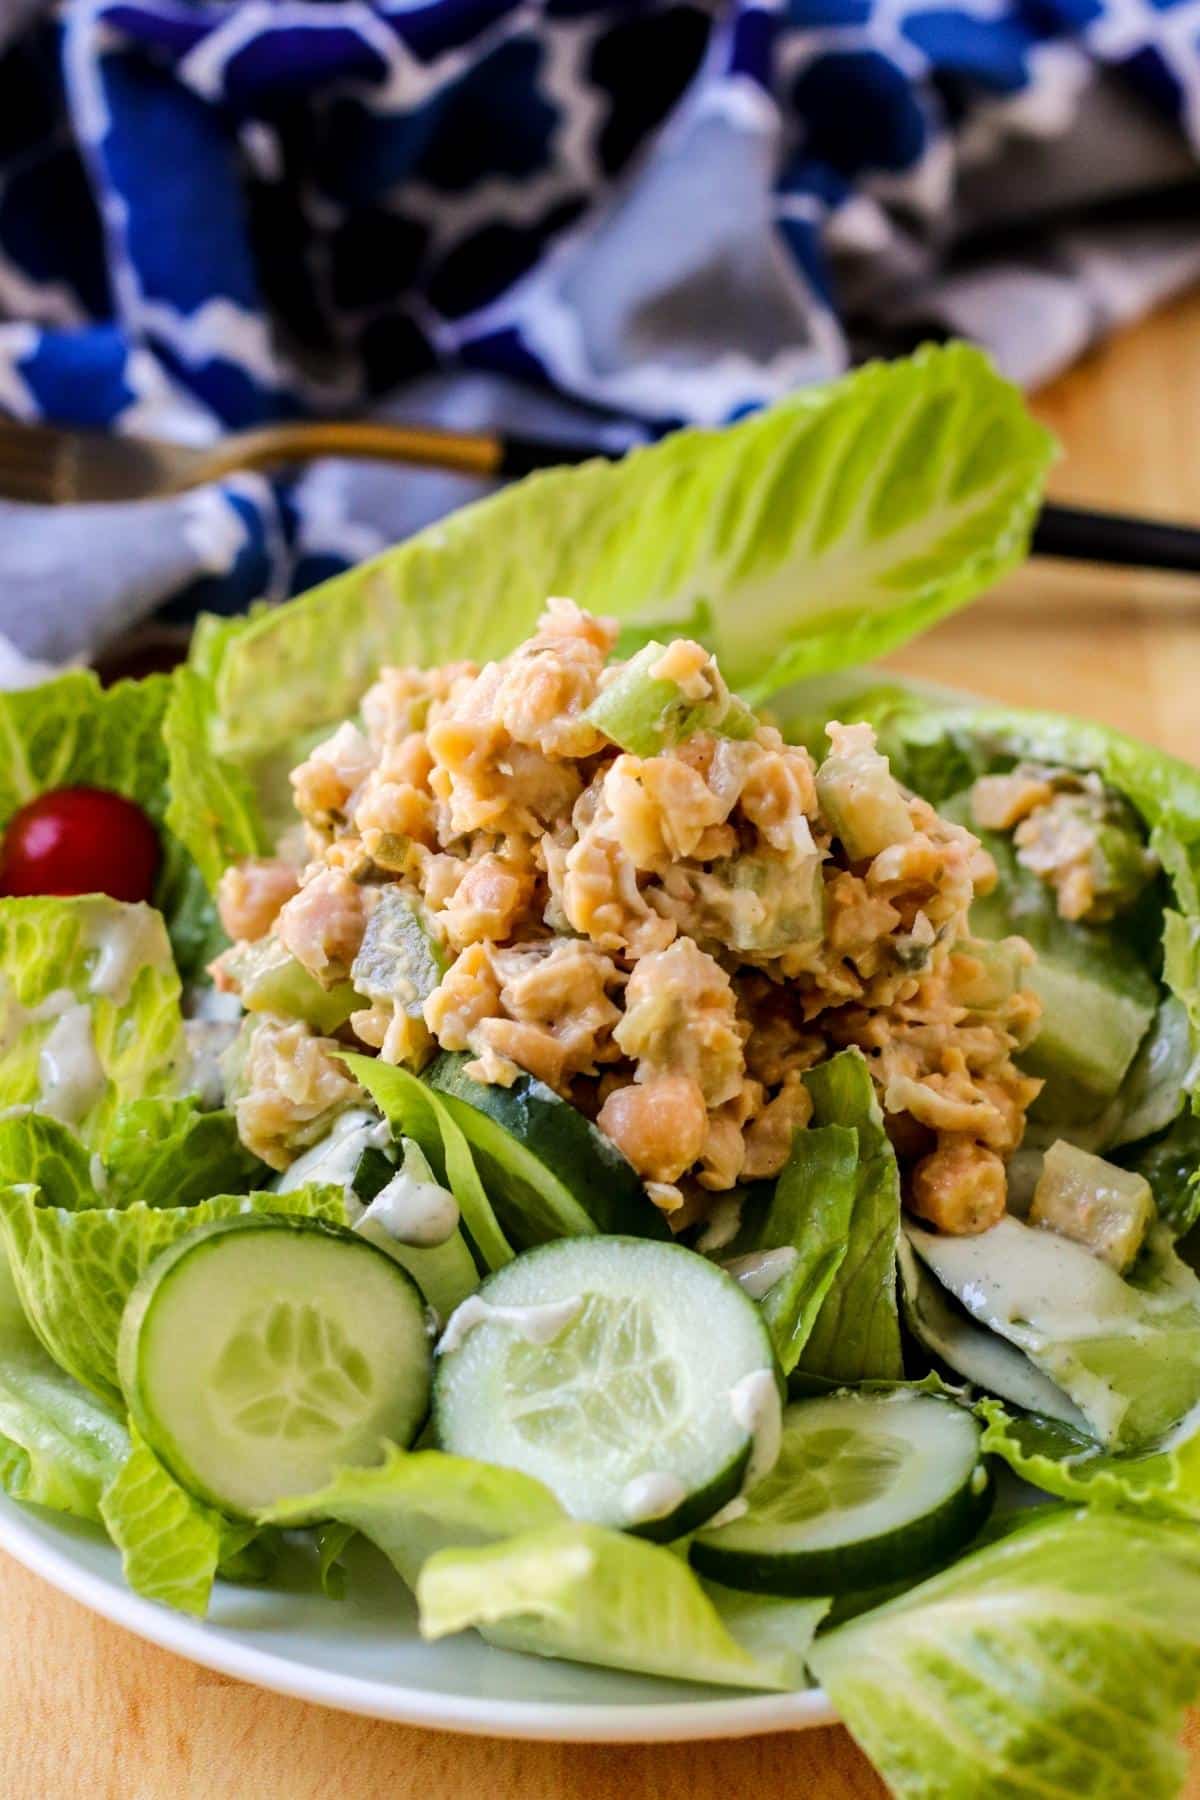 Chickpea tuna salad served on a plate of lettuce, tomatoes, and cucumbers.